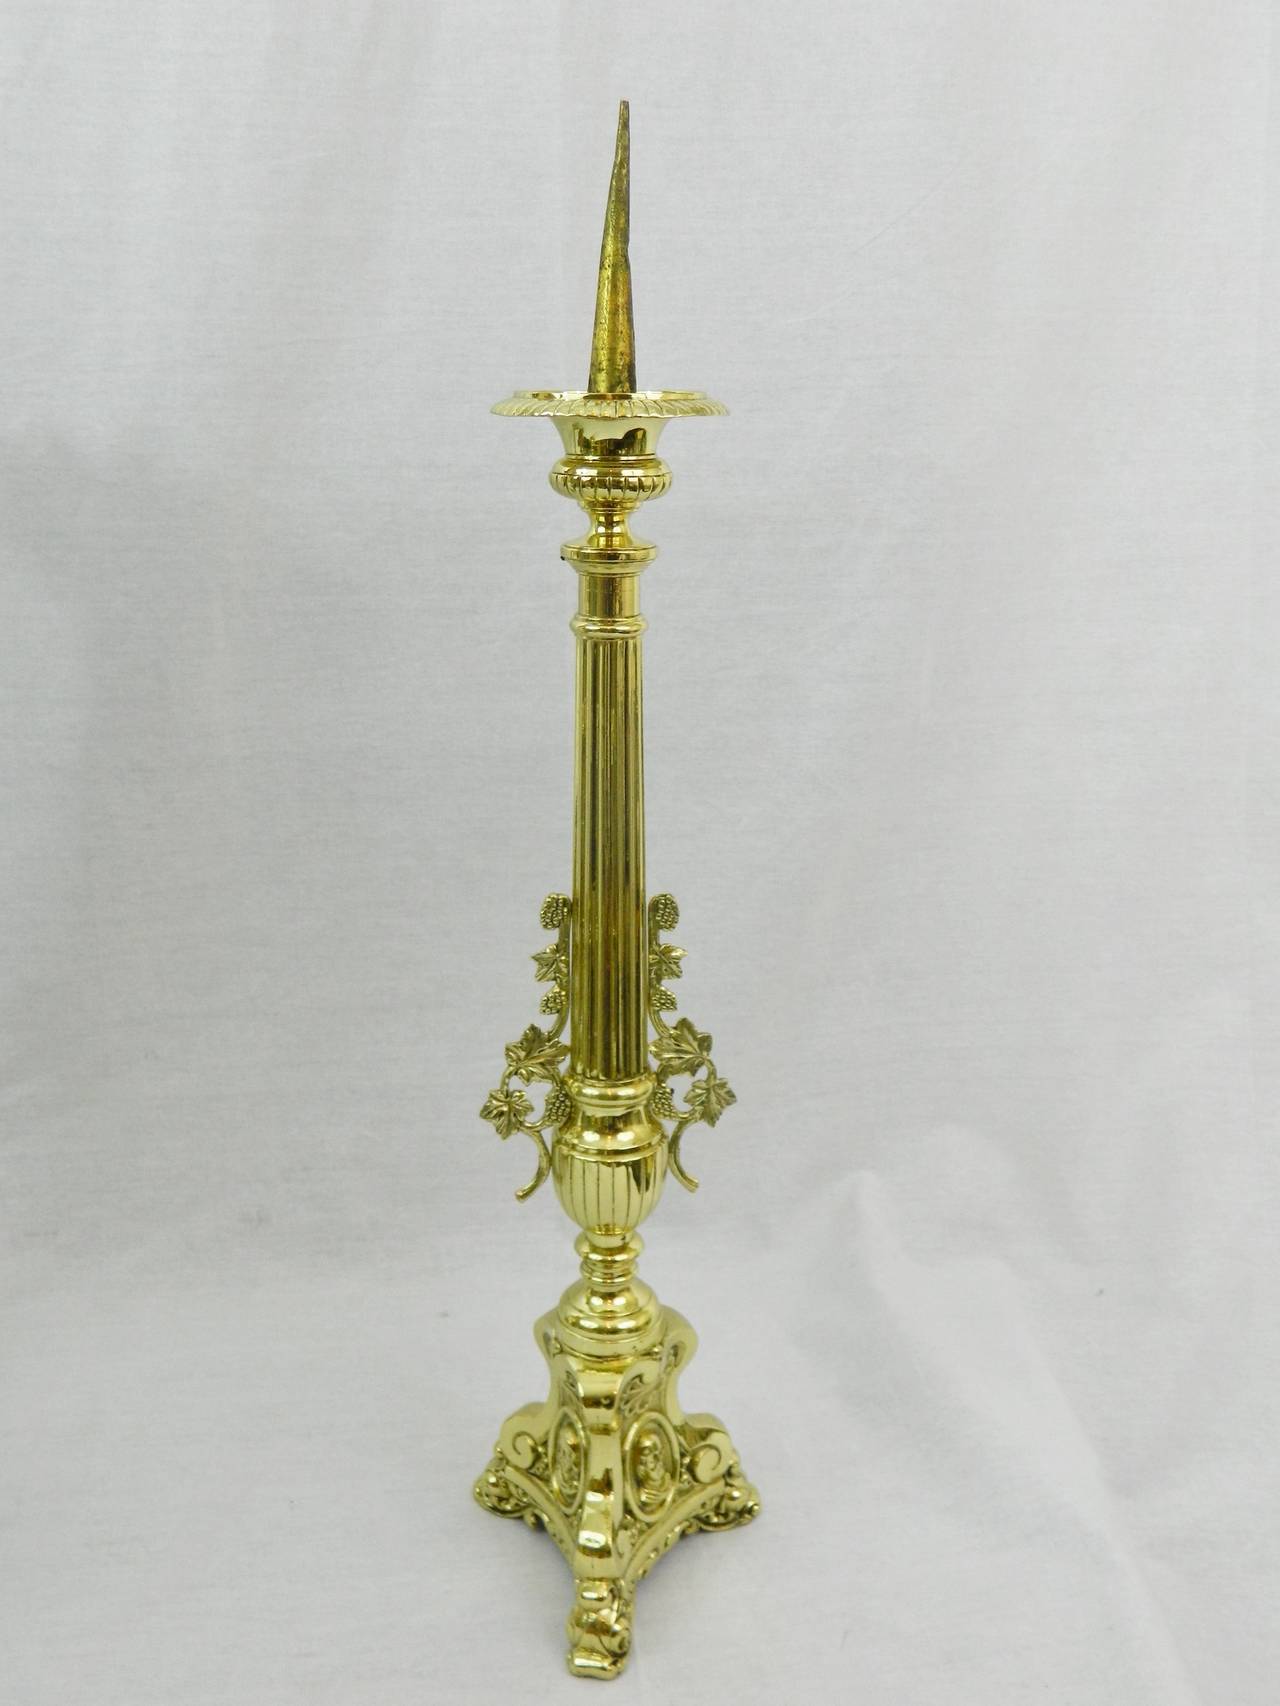 19th Century Polished Brass Decorative Prickets or Candlesticks 4